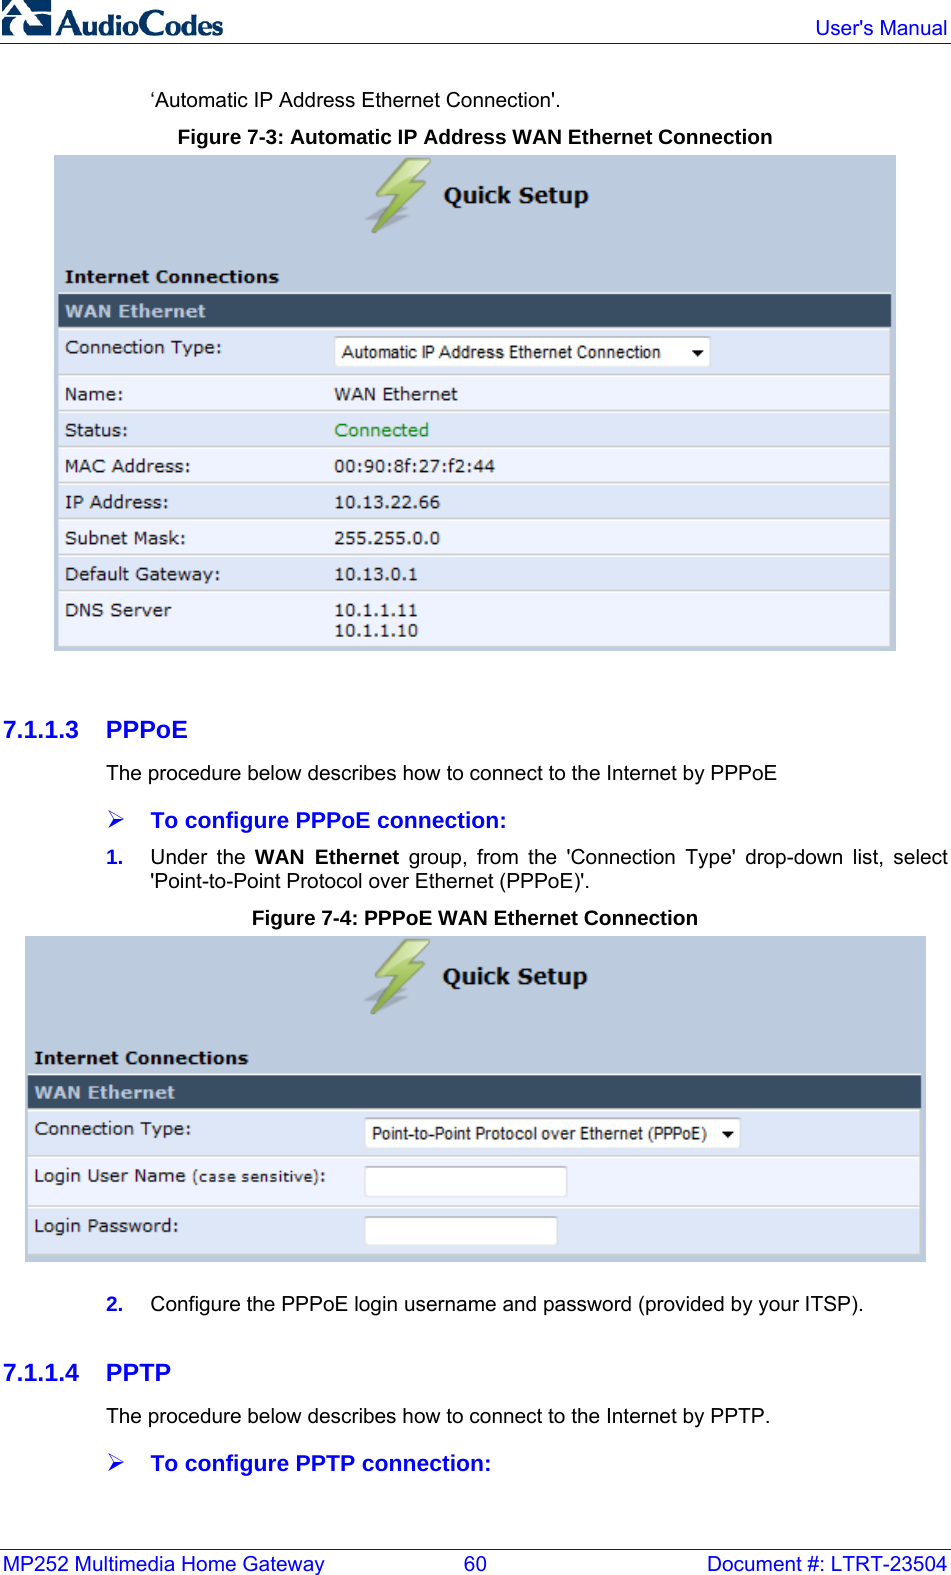 MP252 Multimedia Home Gateway  60  Document #: LTRT-23504  User&apos;s Manual  ‘Automatic IP Address Ethernet Connection&apos;. Figure 7-3: Automatic IP Address WAN Ethernet Connection   7.1.1.3 PPPoE The procedure below describes how to connect to the Internet by PPPoE ¾ To configure PPPoE connection: 1.  Under the WAN Ethernet group, from the &apos;Connection Type&apos; drop-down list, select &apos;Point-to-Point Protocol over Ethernet (PPPoE)&apos;. Figure 7-4: PPPoE WAN Ethernet Connection  2.  Configure the PPPoE login username and password (provided by your ITSP).  7.1.1.4 PPTP The procedure below describes how to connect to the Internet by PPTP. ¾ To configure PPTP connection: 